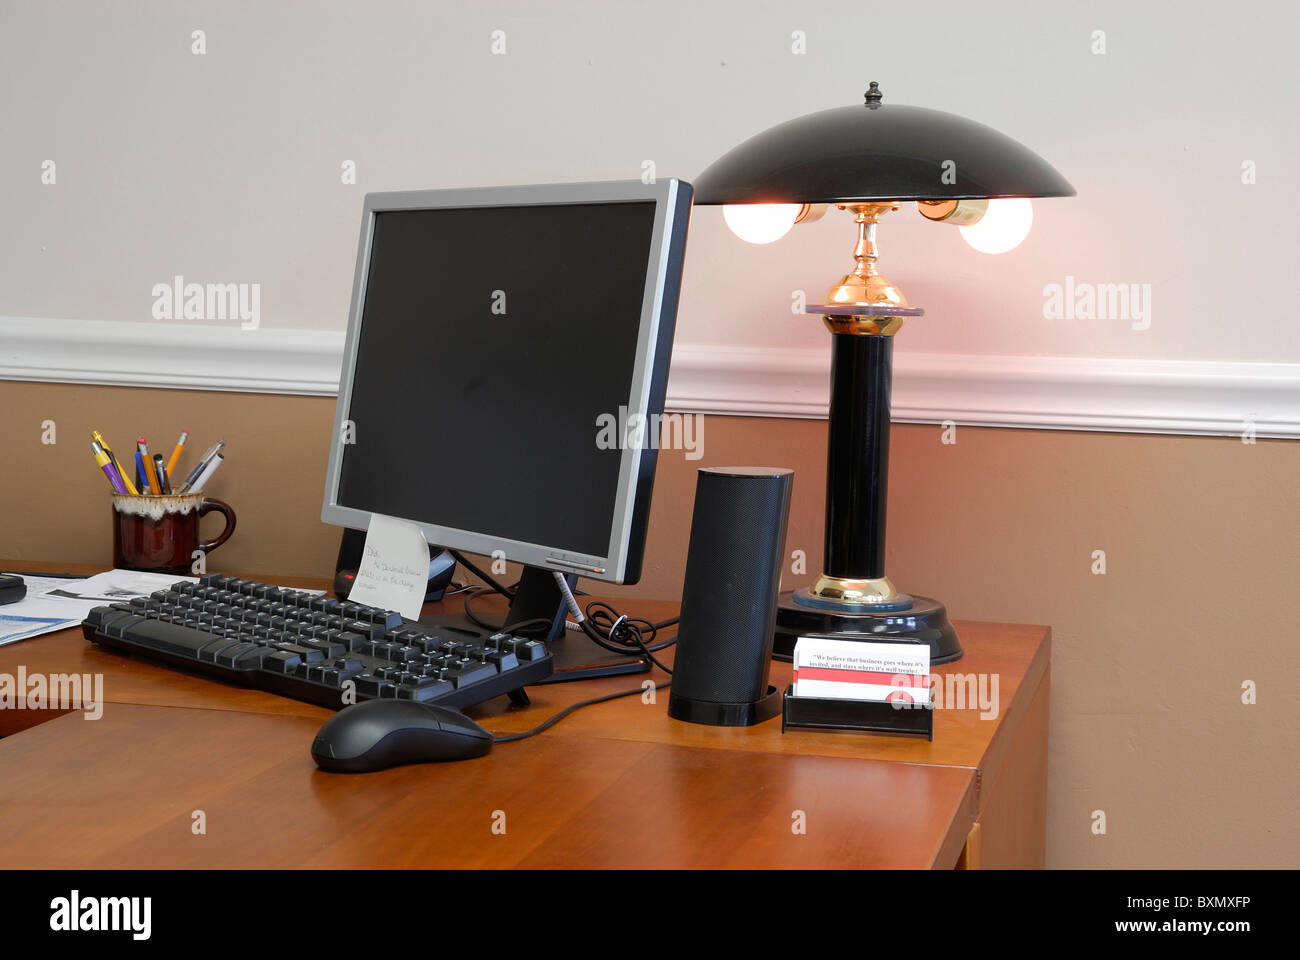 Modern office with a wooden desktop with computer keyboard and monitor and mouse. Also displaying a lamp and some paper work. Stock Photo